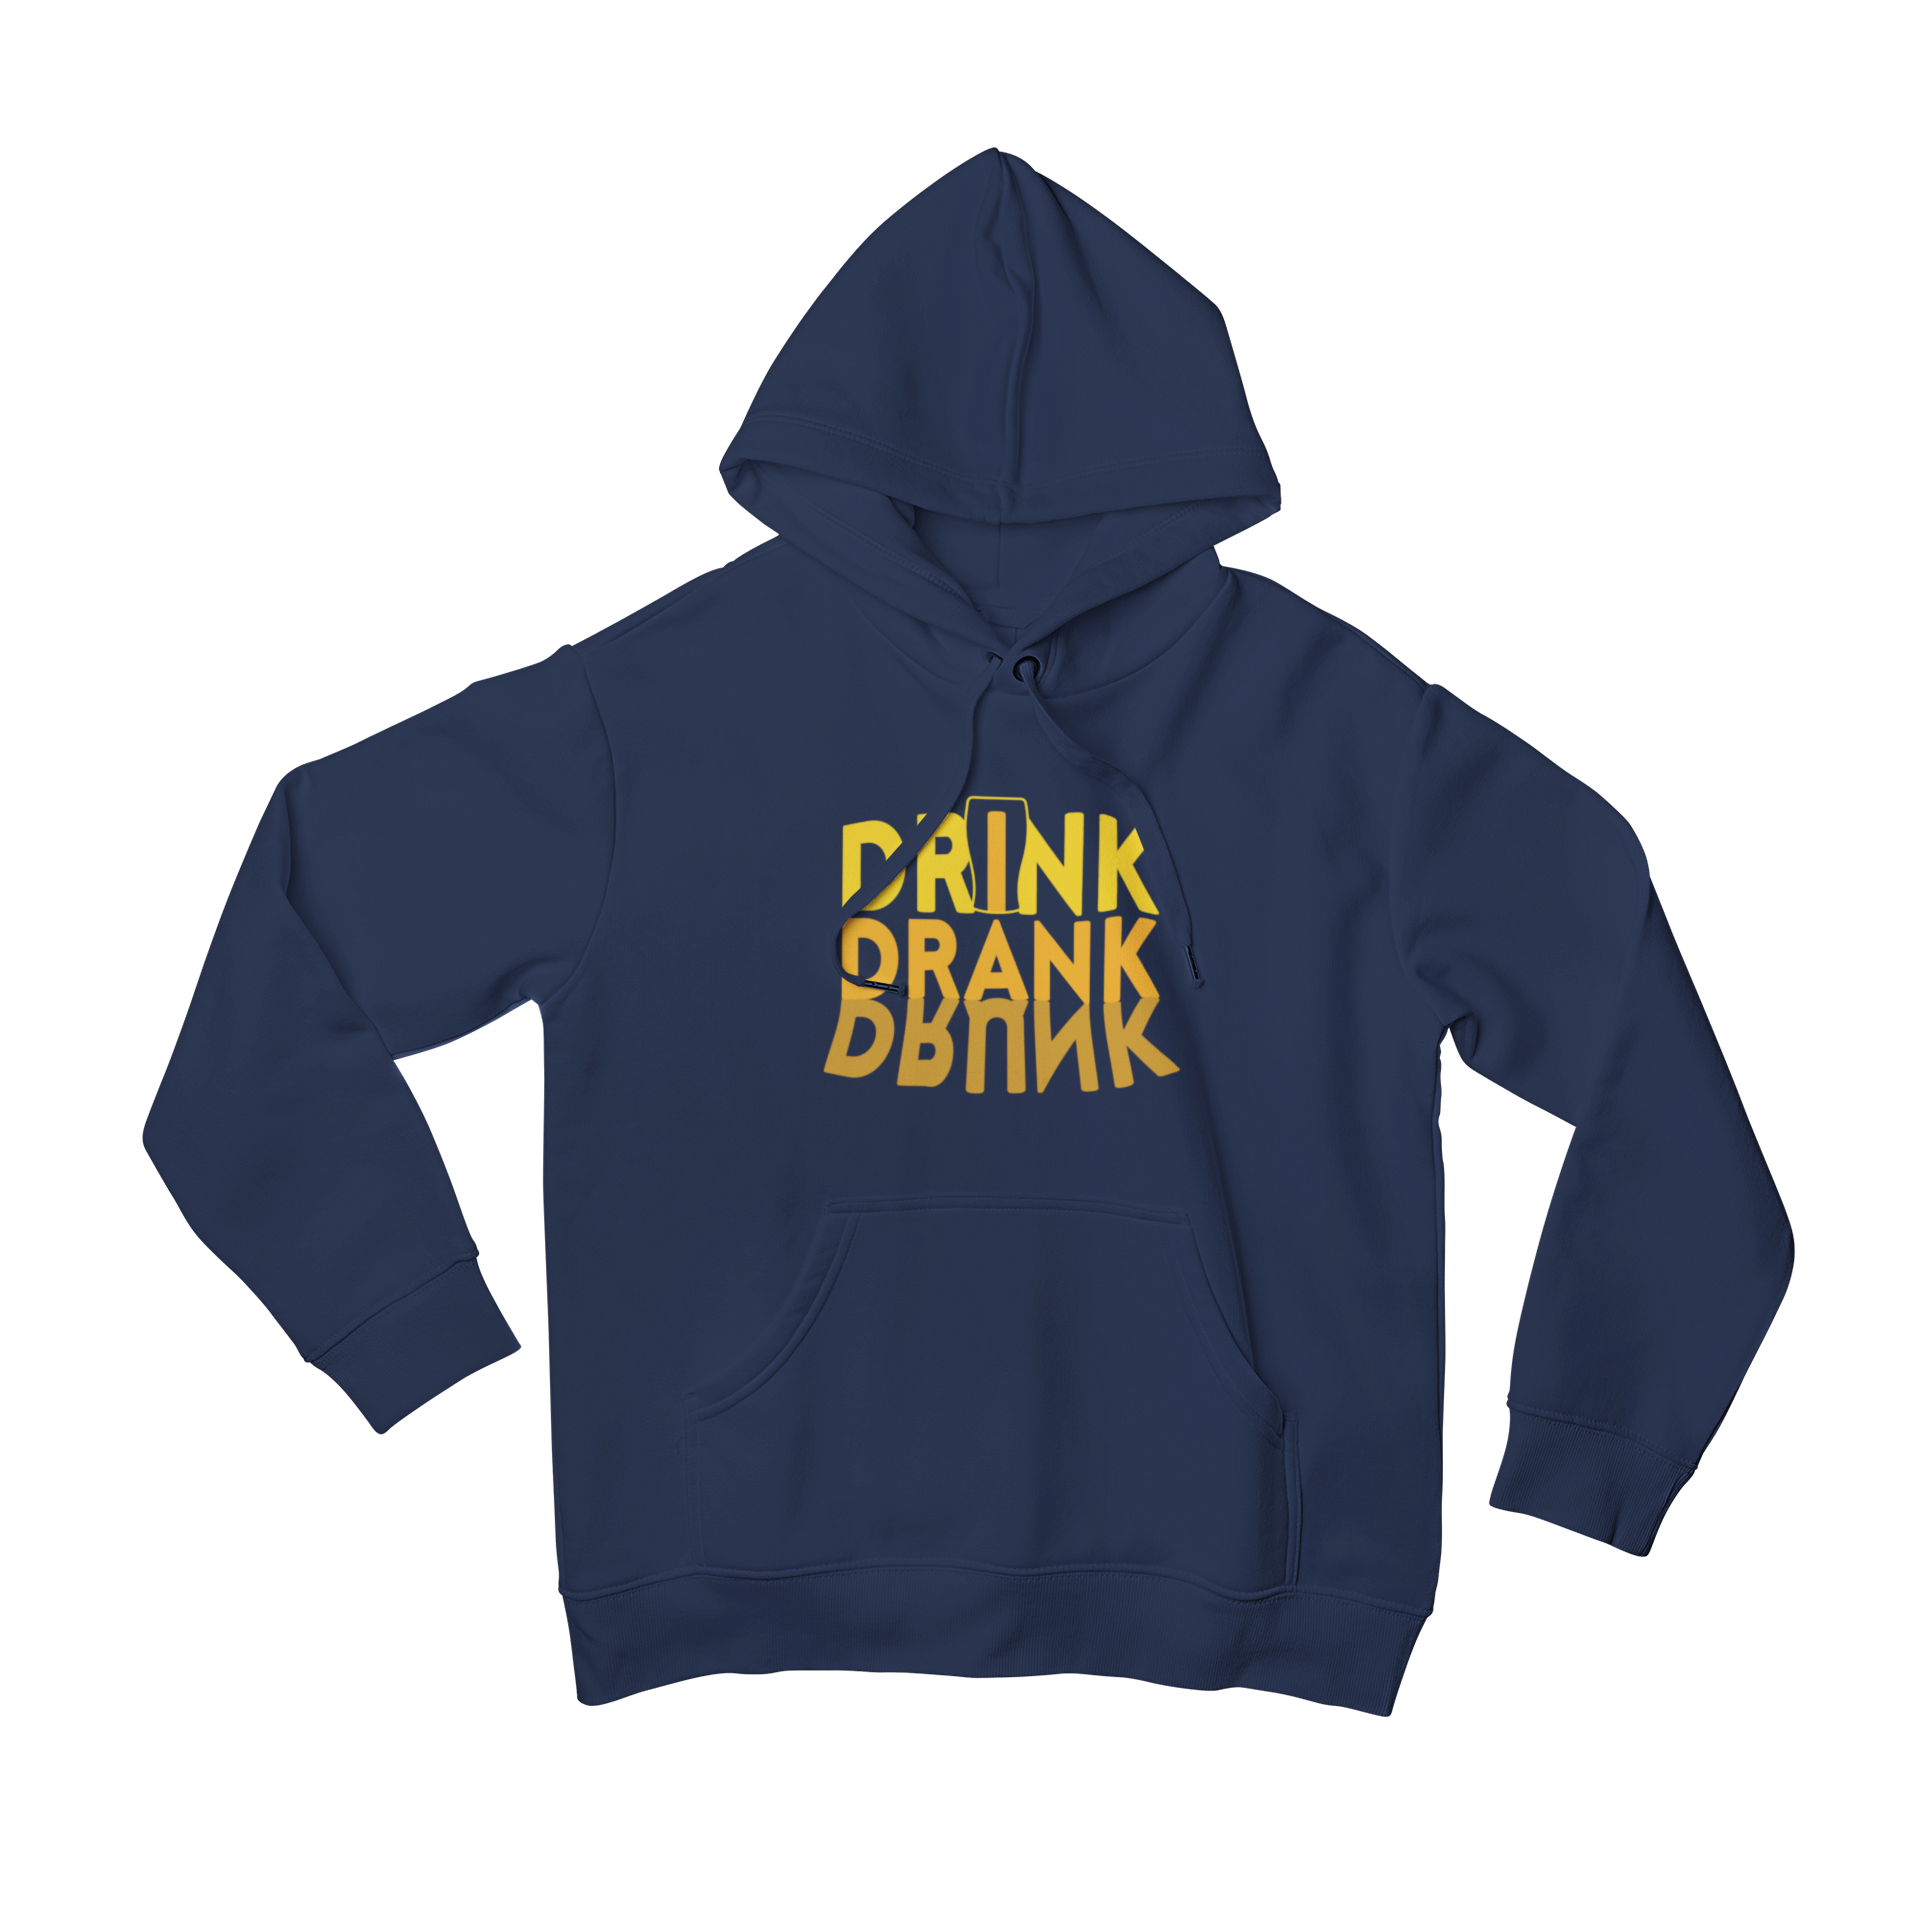 Looking for a unique and trendy hoodie to wear this season? Check out teevolution's front print slogan hoodie that says "Drink Drank Drunk"! It's the perfect way to show off your fun and carefree personality while staying warm and stylish. Get yours today!